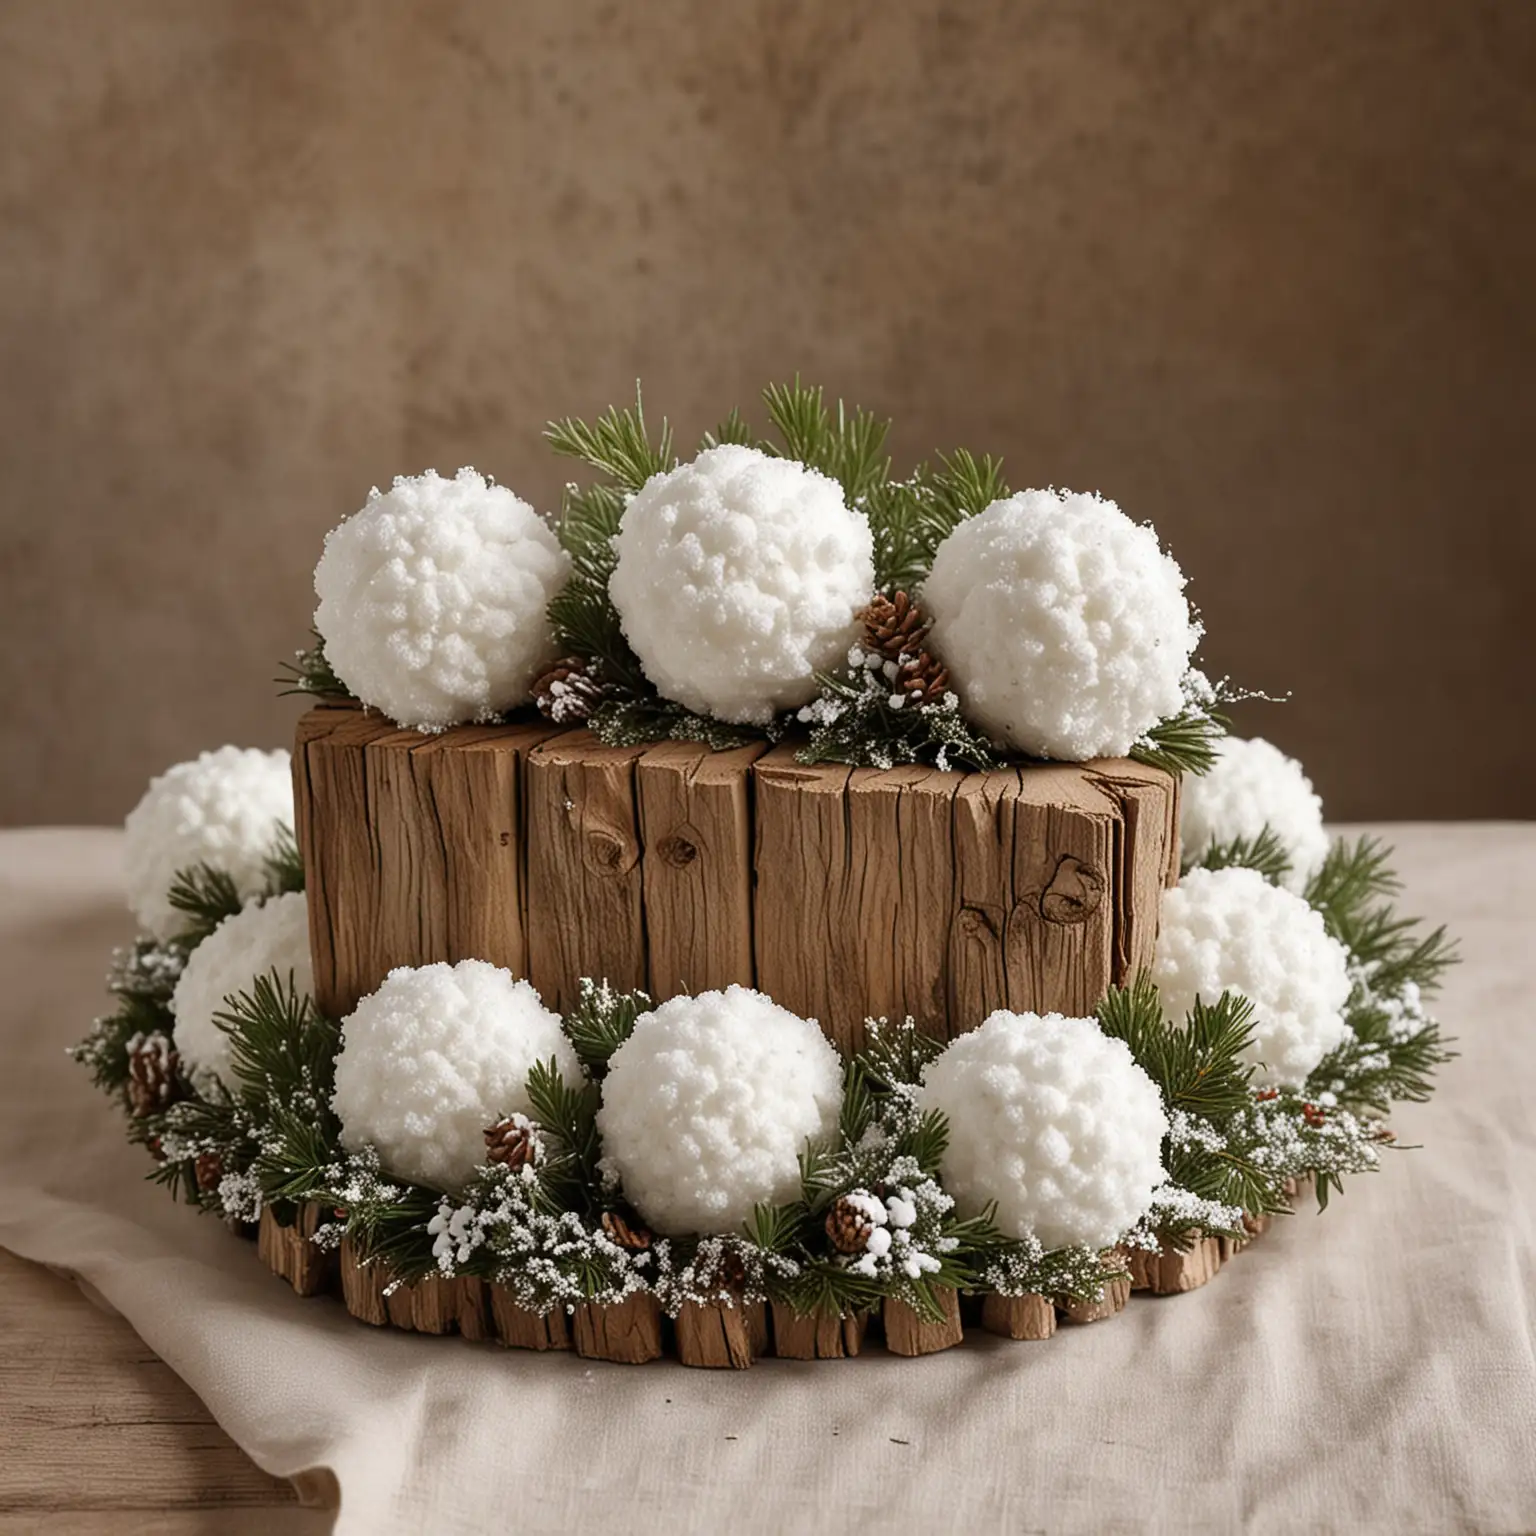 Rustic-Winter-Wedding-Centerpiece-with-Faux-Snowballs